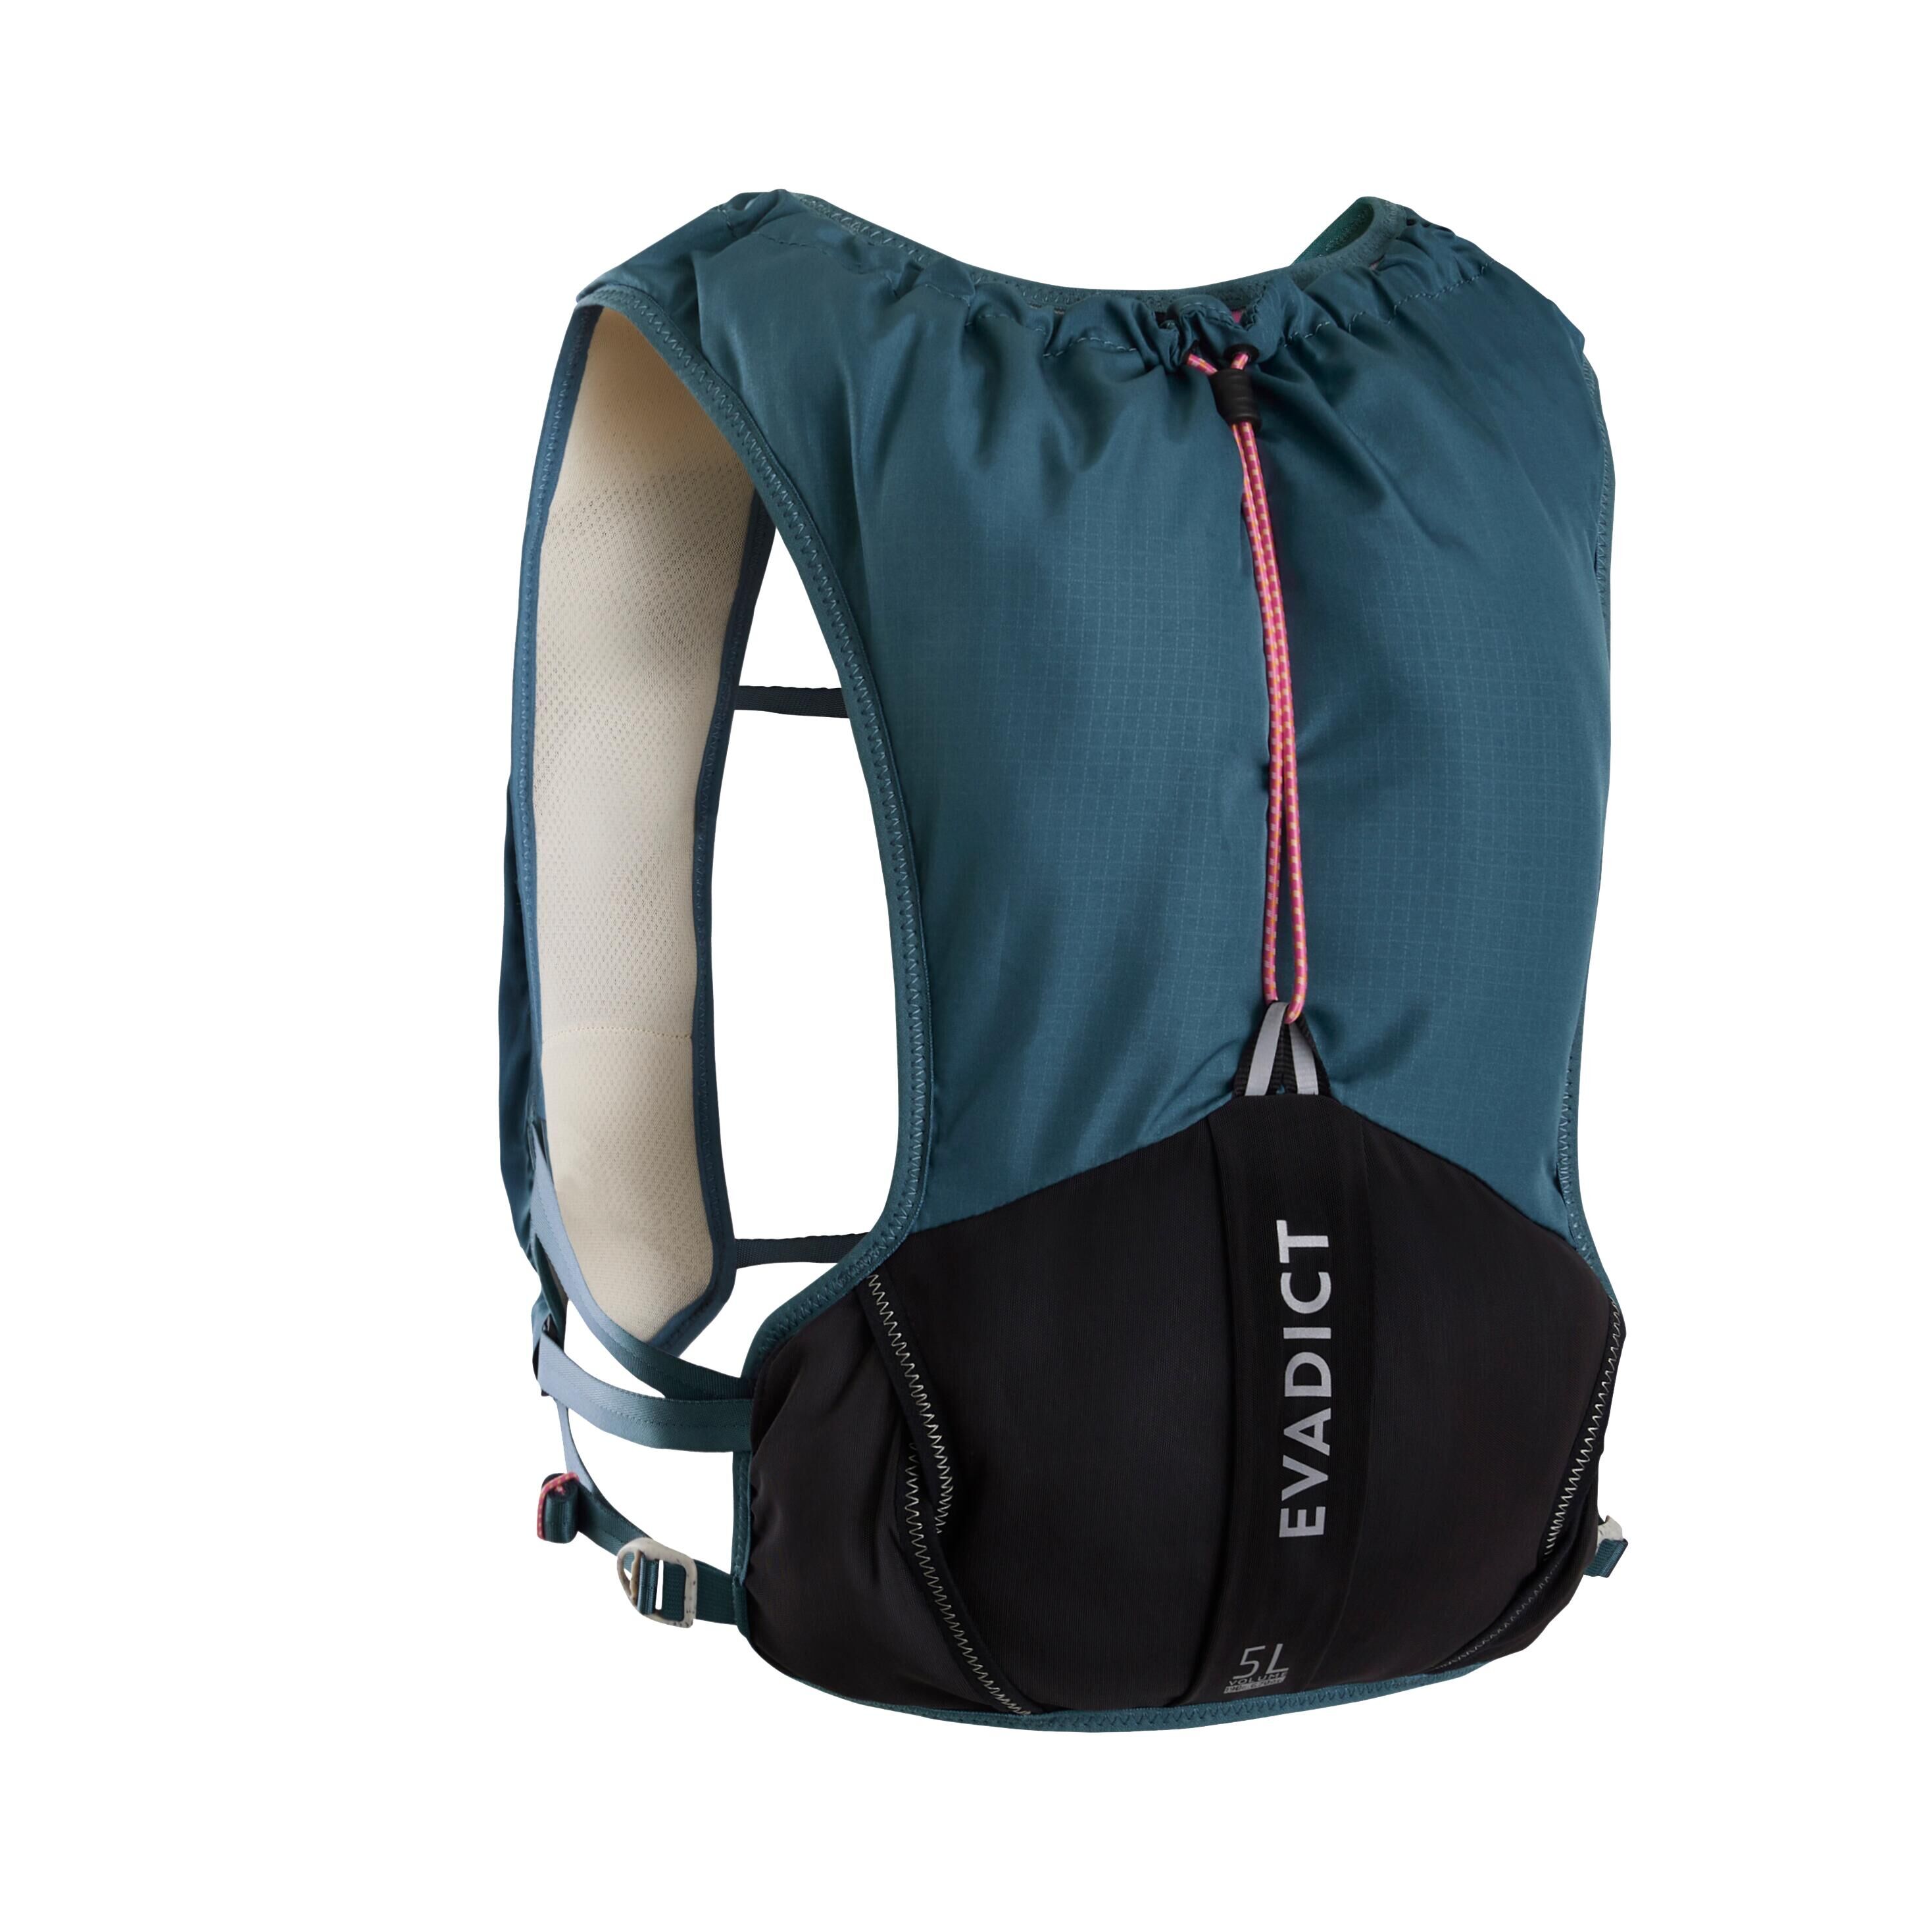 KIPRUN 5L TRAIL RUNNING BAG - TURQUOISE - SOLD WITH 1L WATER BLADDER